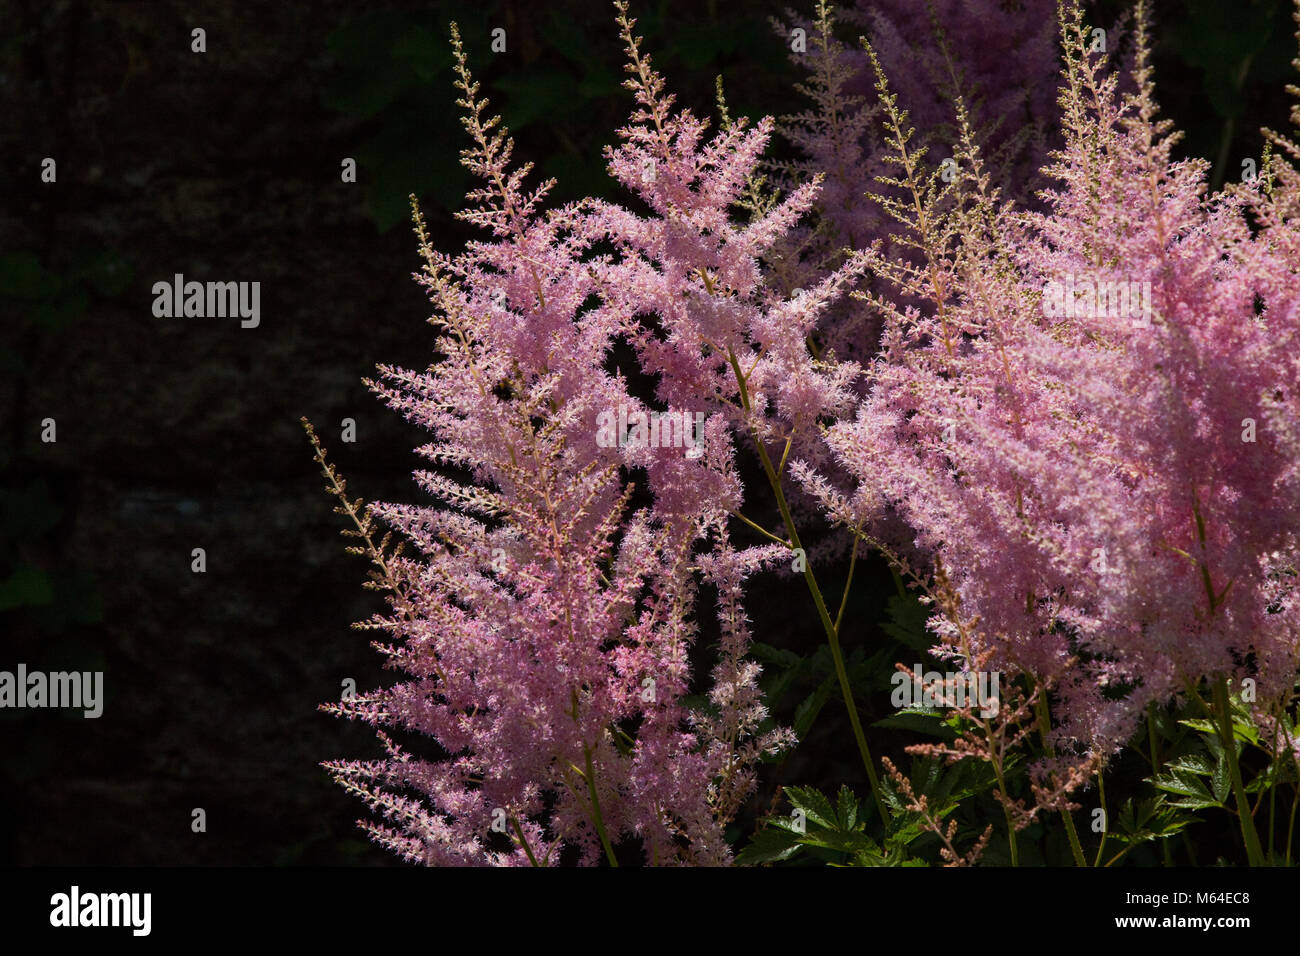 Pyramidal pink fluffy Astilbe Federsee flowers. Stock Photo